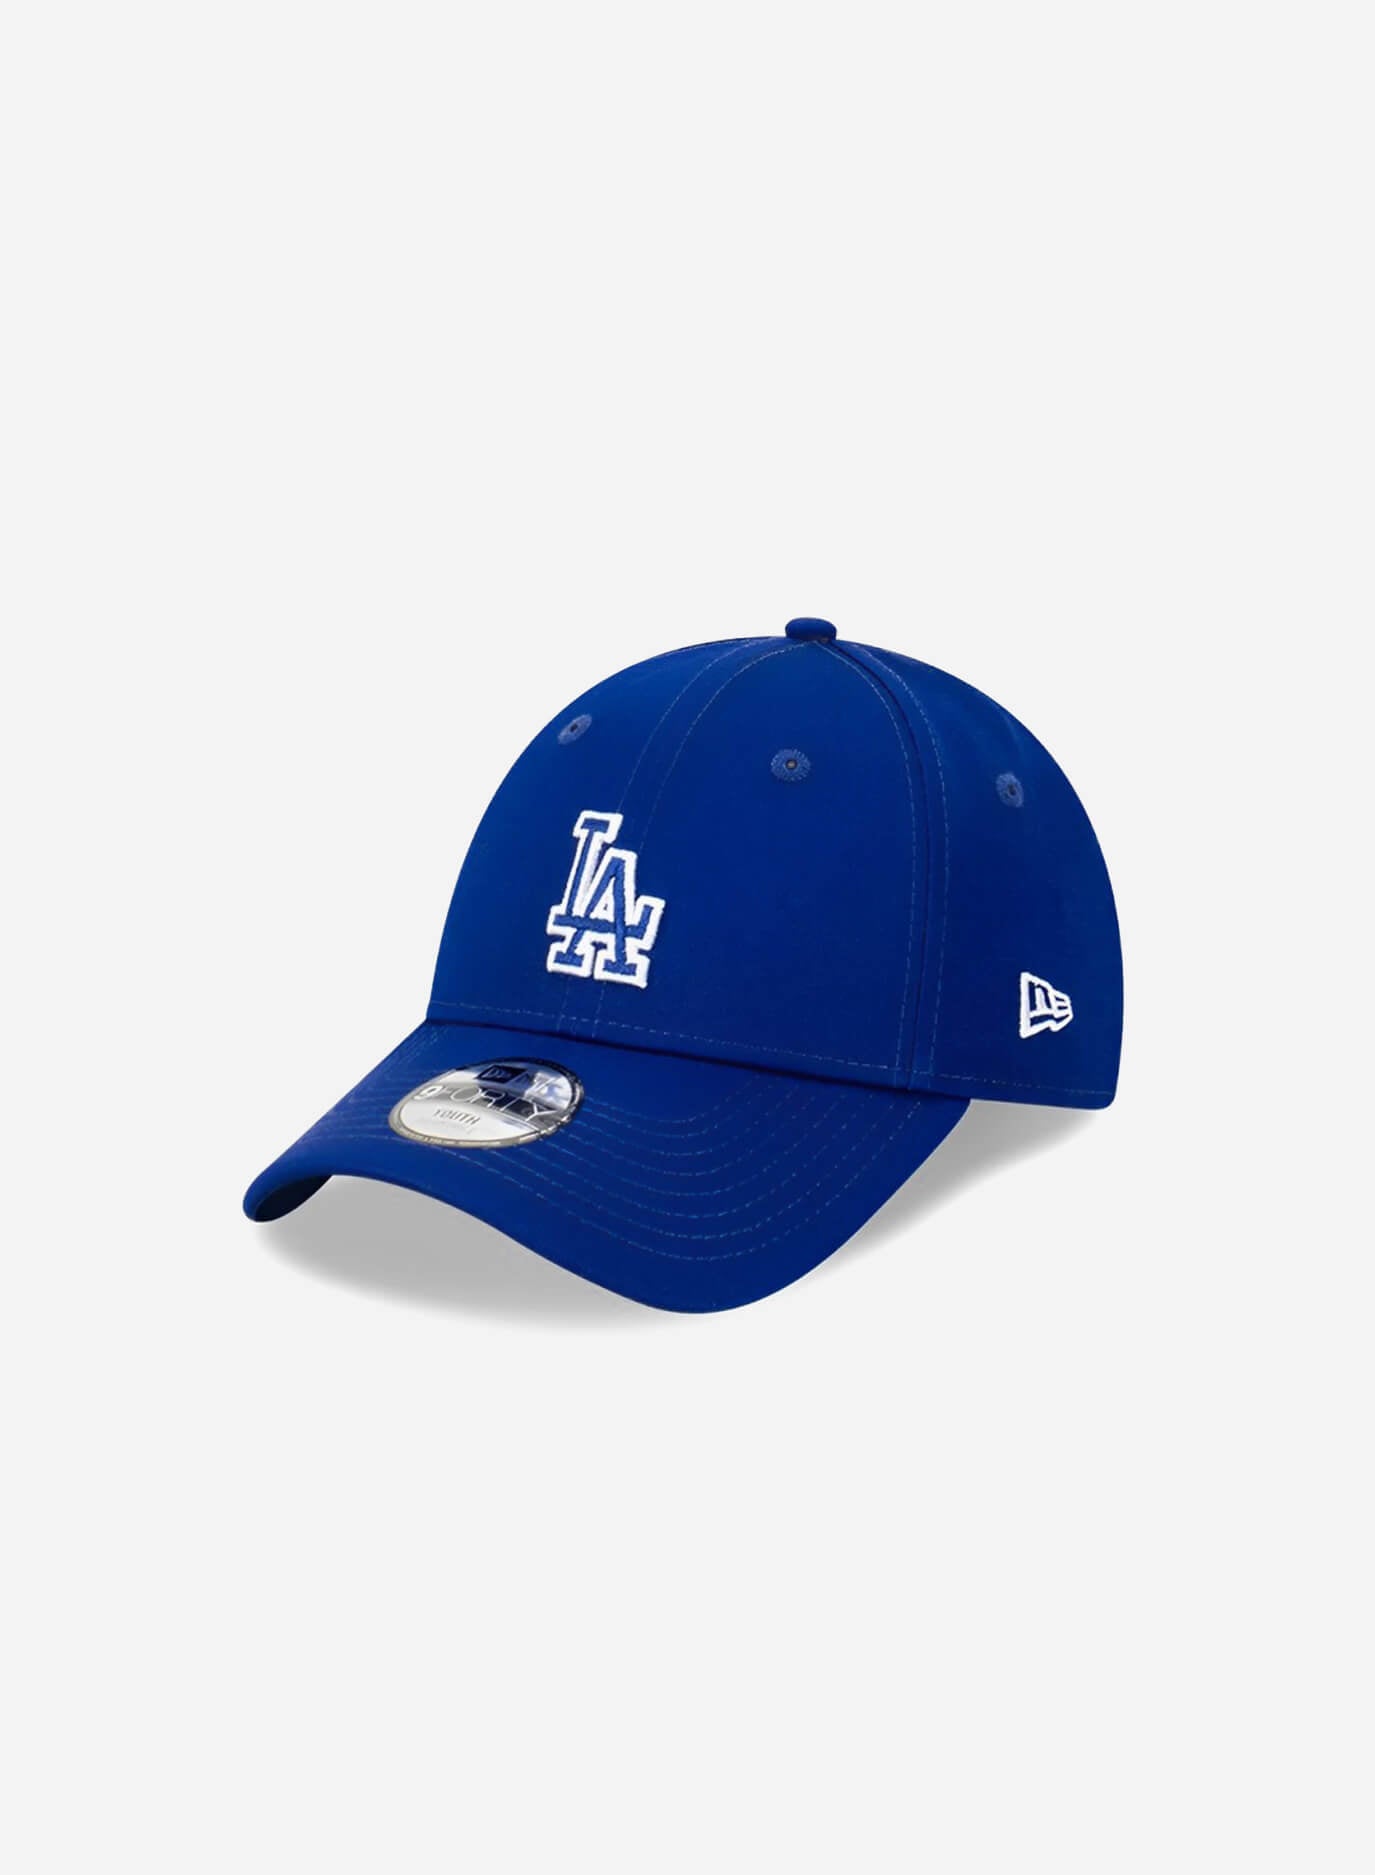 Los Angeles Dodgers Outline Midi Youth Snapback